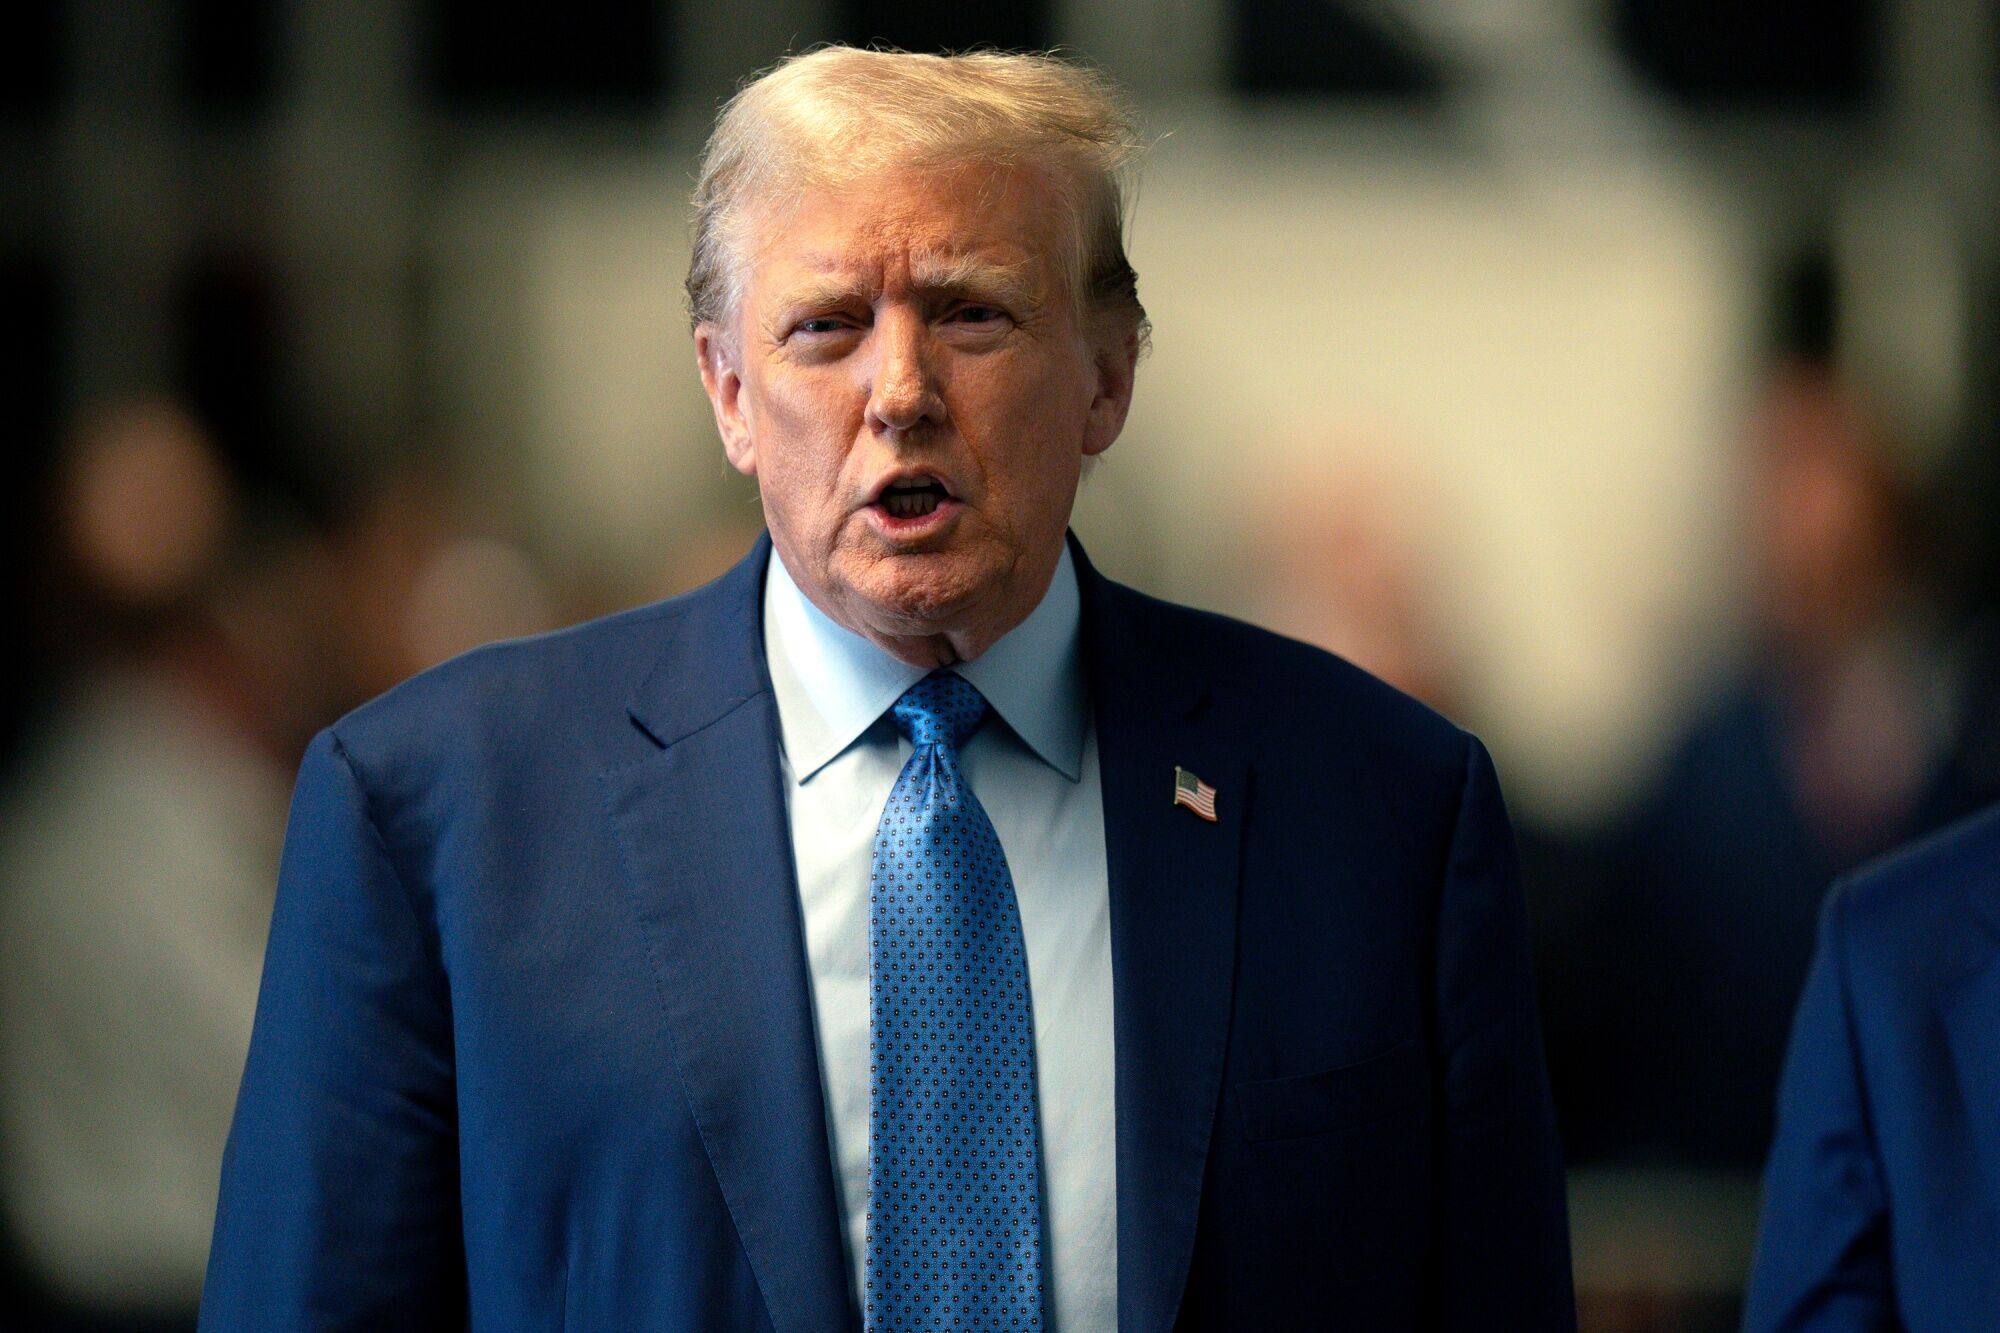 Donald Trump said “what Biden is doing with respect to Israel is disgraceful”, in reference to the president’s threat to stop sending weapons to Israel as it wages war against the Palestinian militant group in Gaza. Photo: Bloomberg